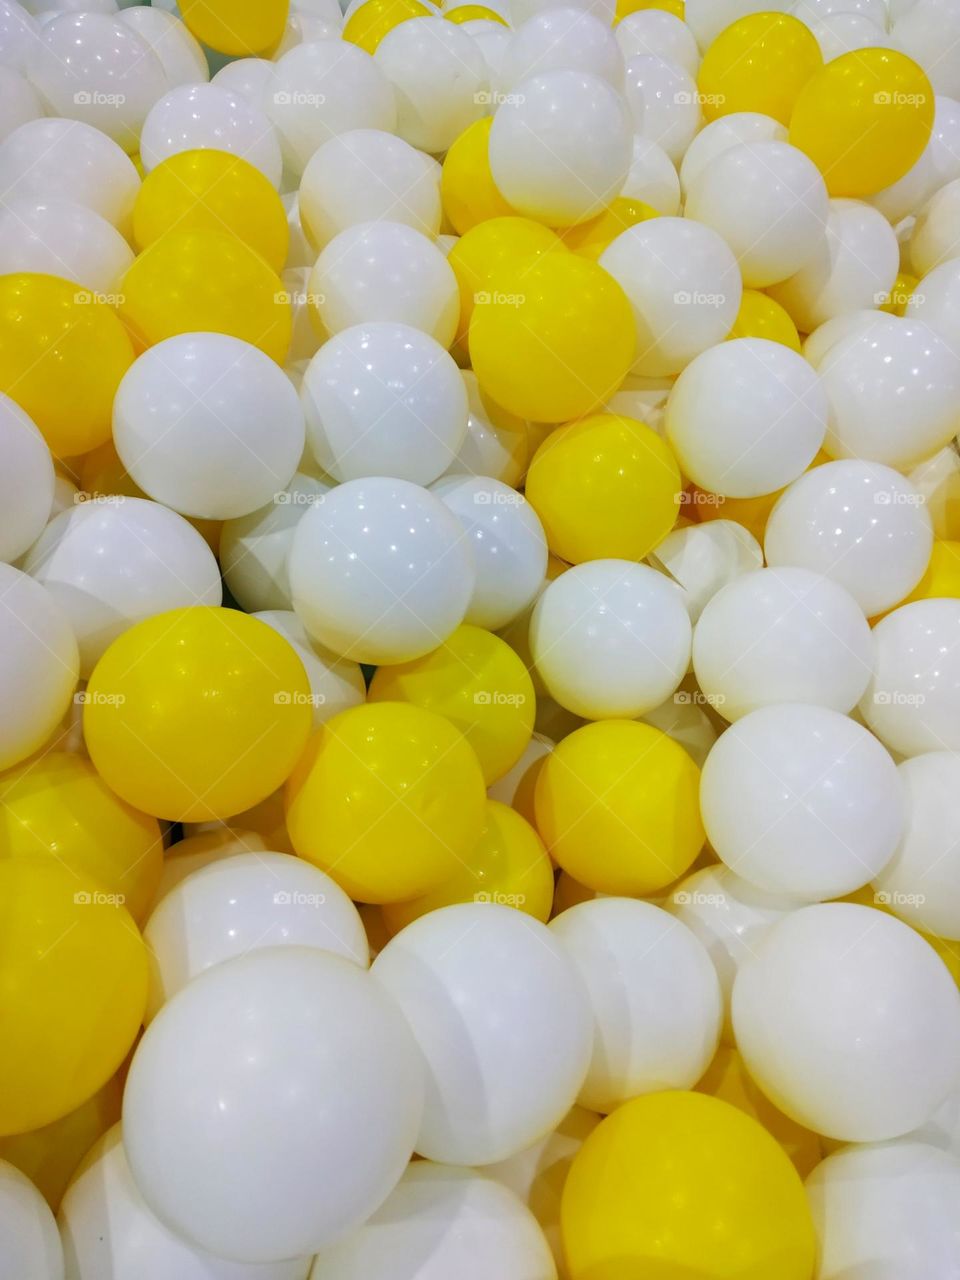 A collection of yellow and white balls